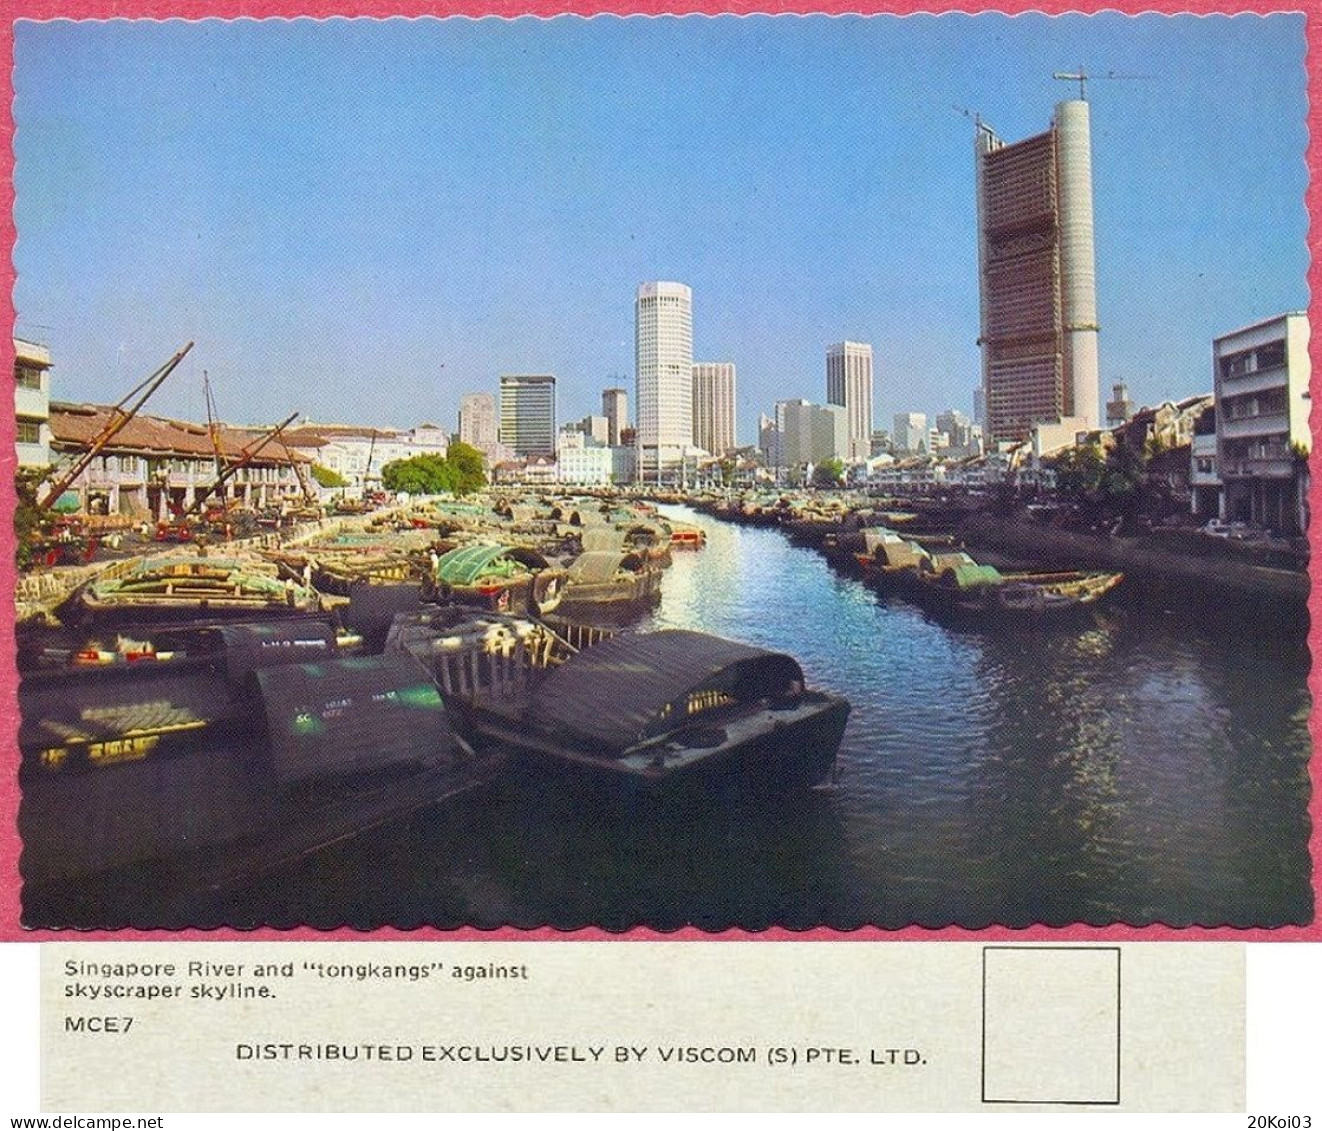 Singapore River "tongkongs" Skyscraper Skyline, 1977's MCE7 DISTRIBUTED EXCLUSIVELY BY VISCOM (S) PTE. LTD. Vintage_cpc - Singapour